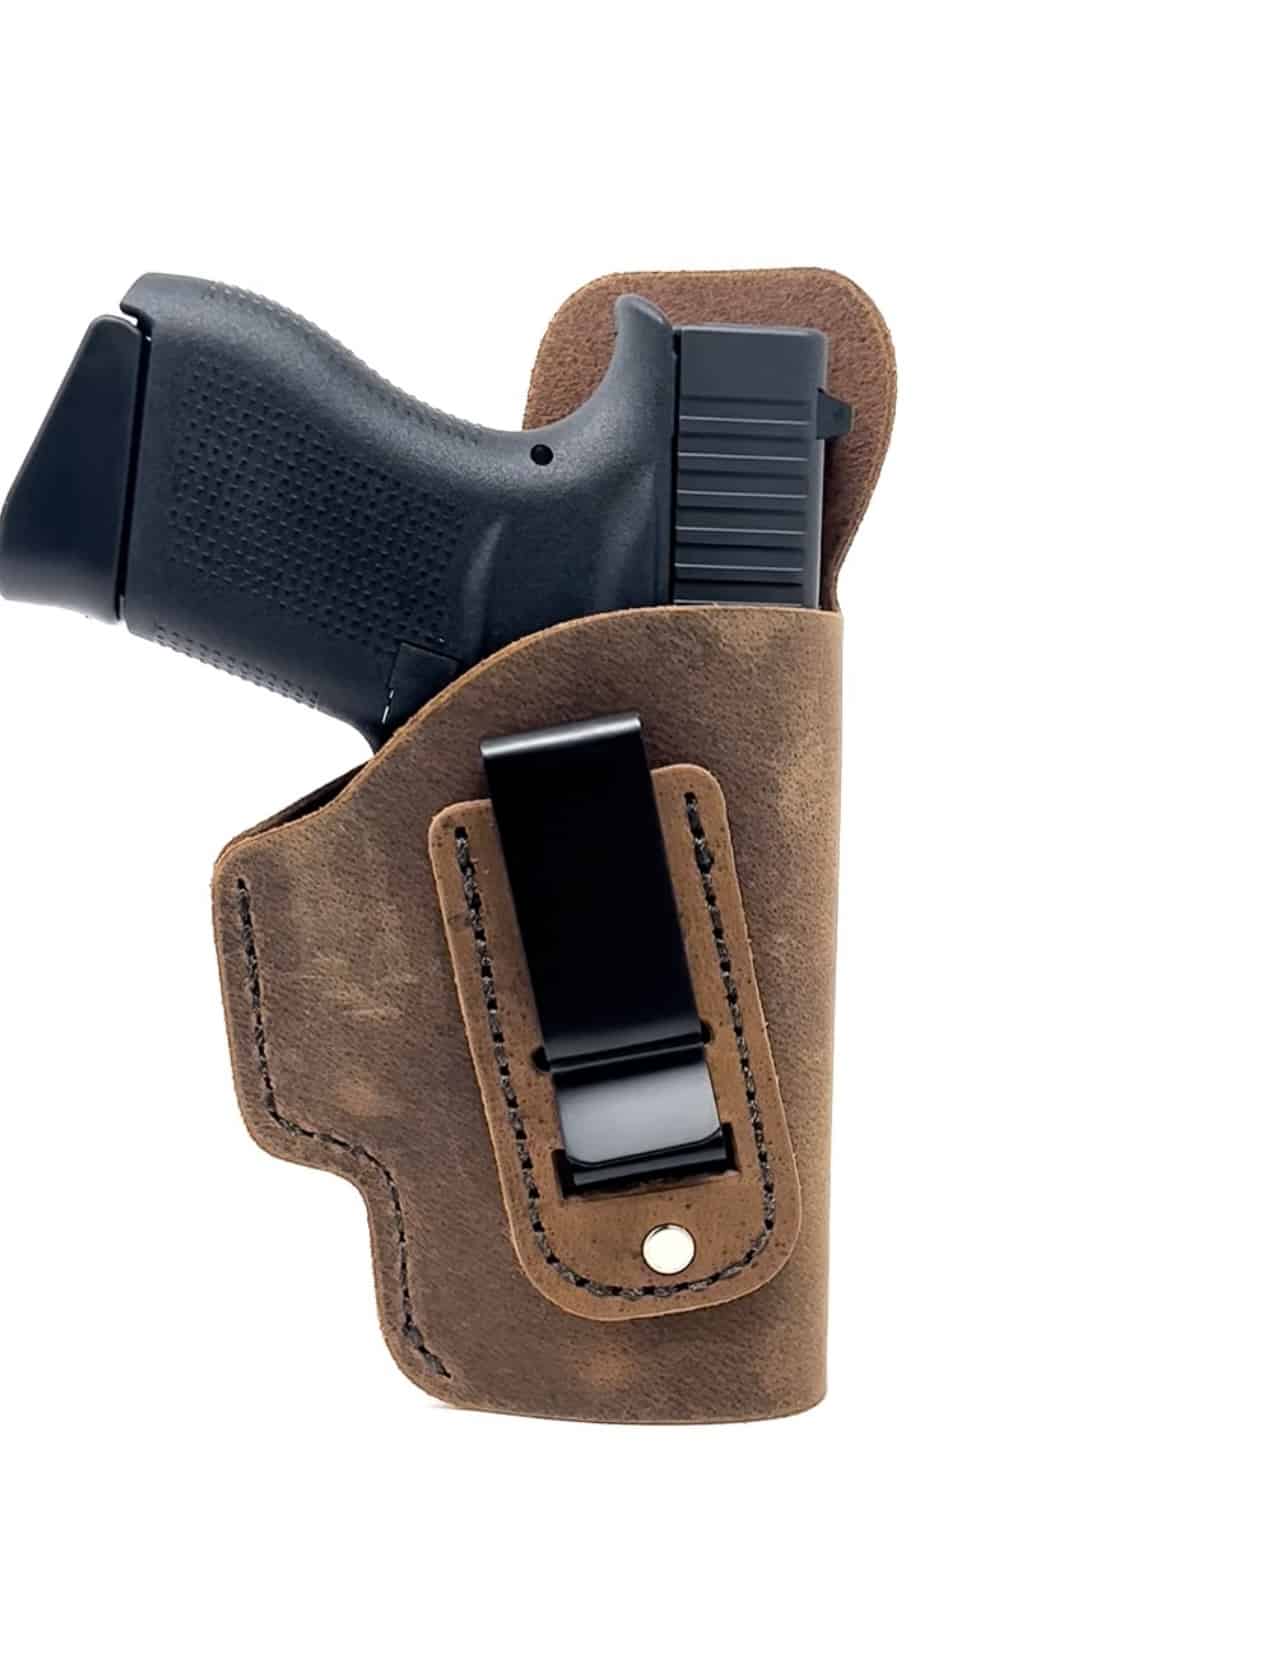 Pro-tech Brown Leather OWB Belt Slide Holster for Smith & Wesson M&P Shield 40,9 